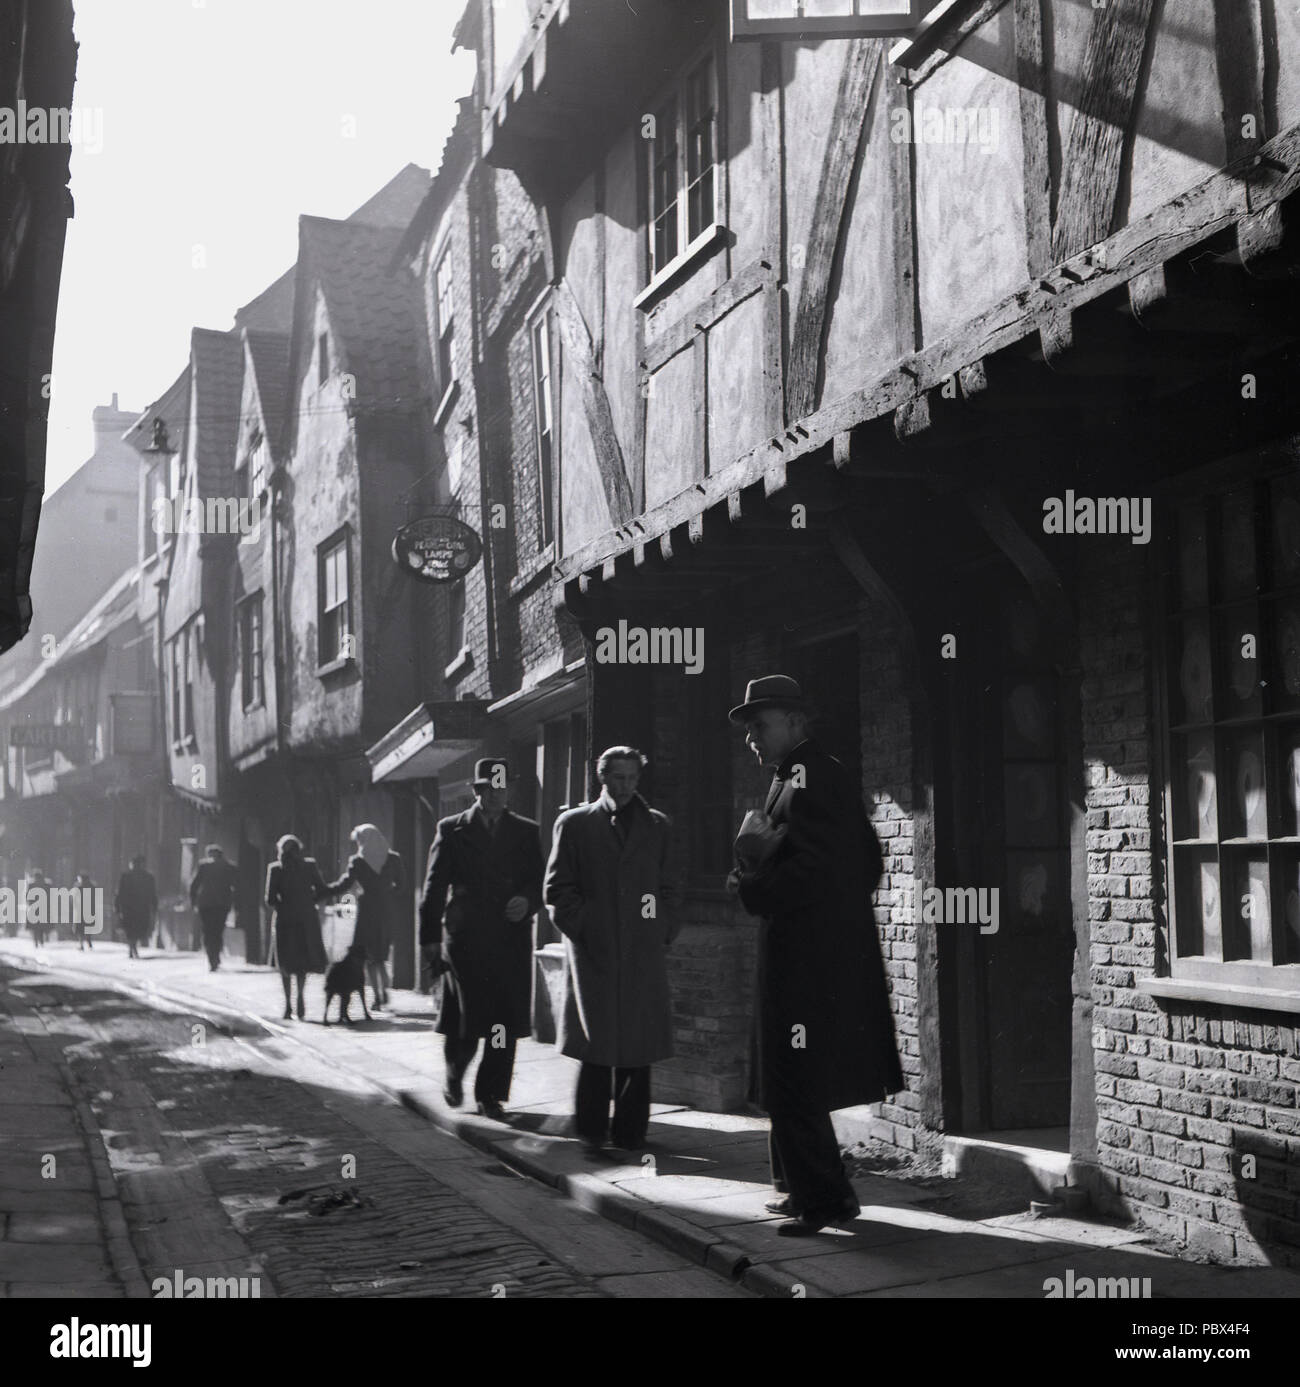 1950s, a view of the Shambles, York, England, UK, an ancient medieval narrow cobbled street of over-hanging timber-framed buildings. The Shambles was for centuries a street of butchers and famous for its meat and is considered the most medieval street in England. Stock Photo